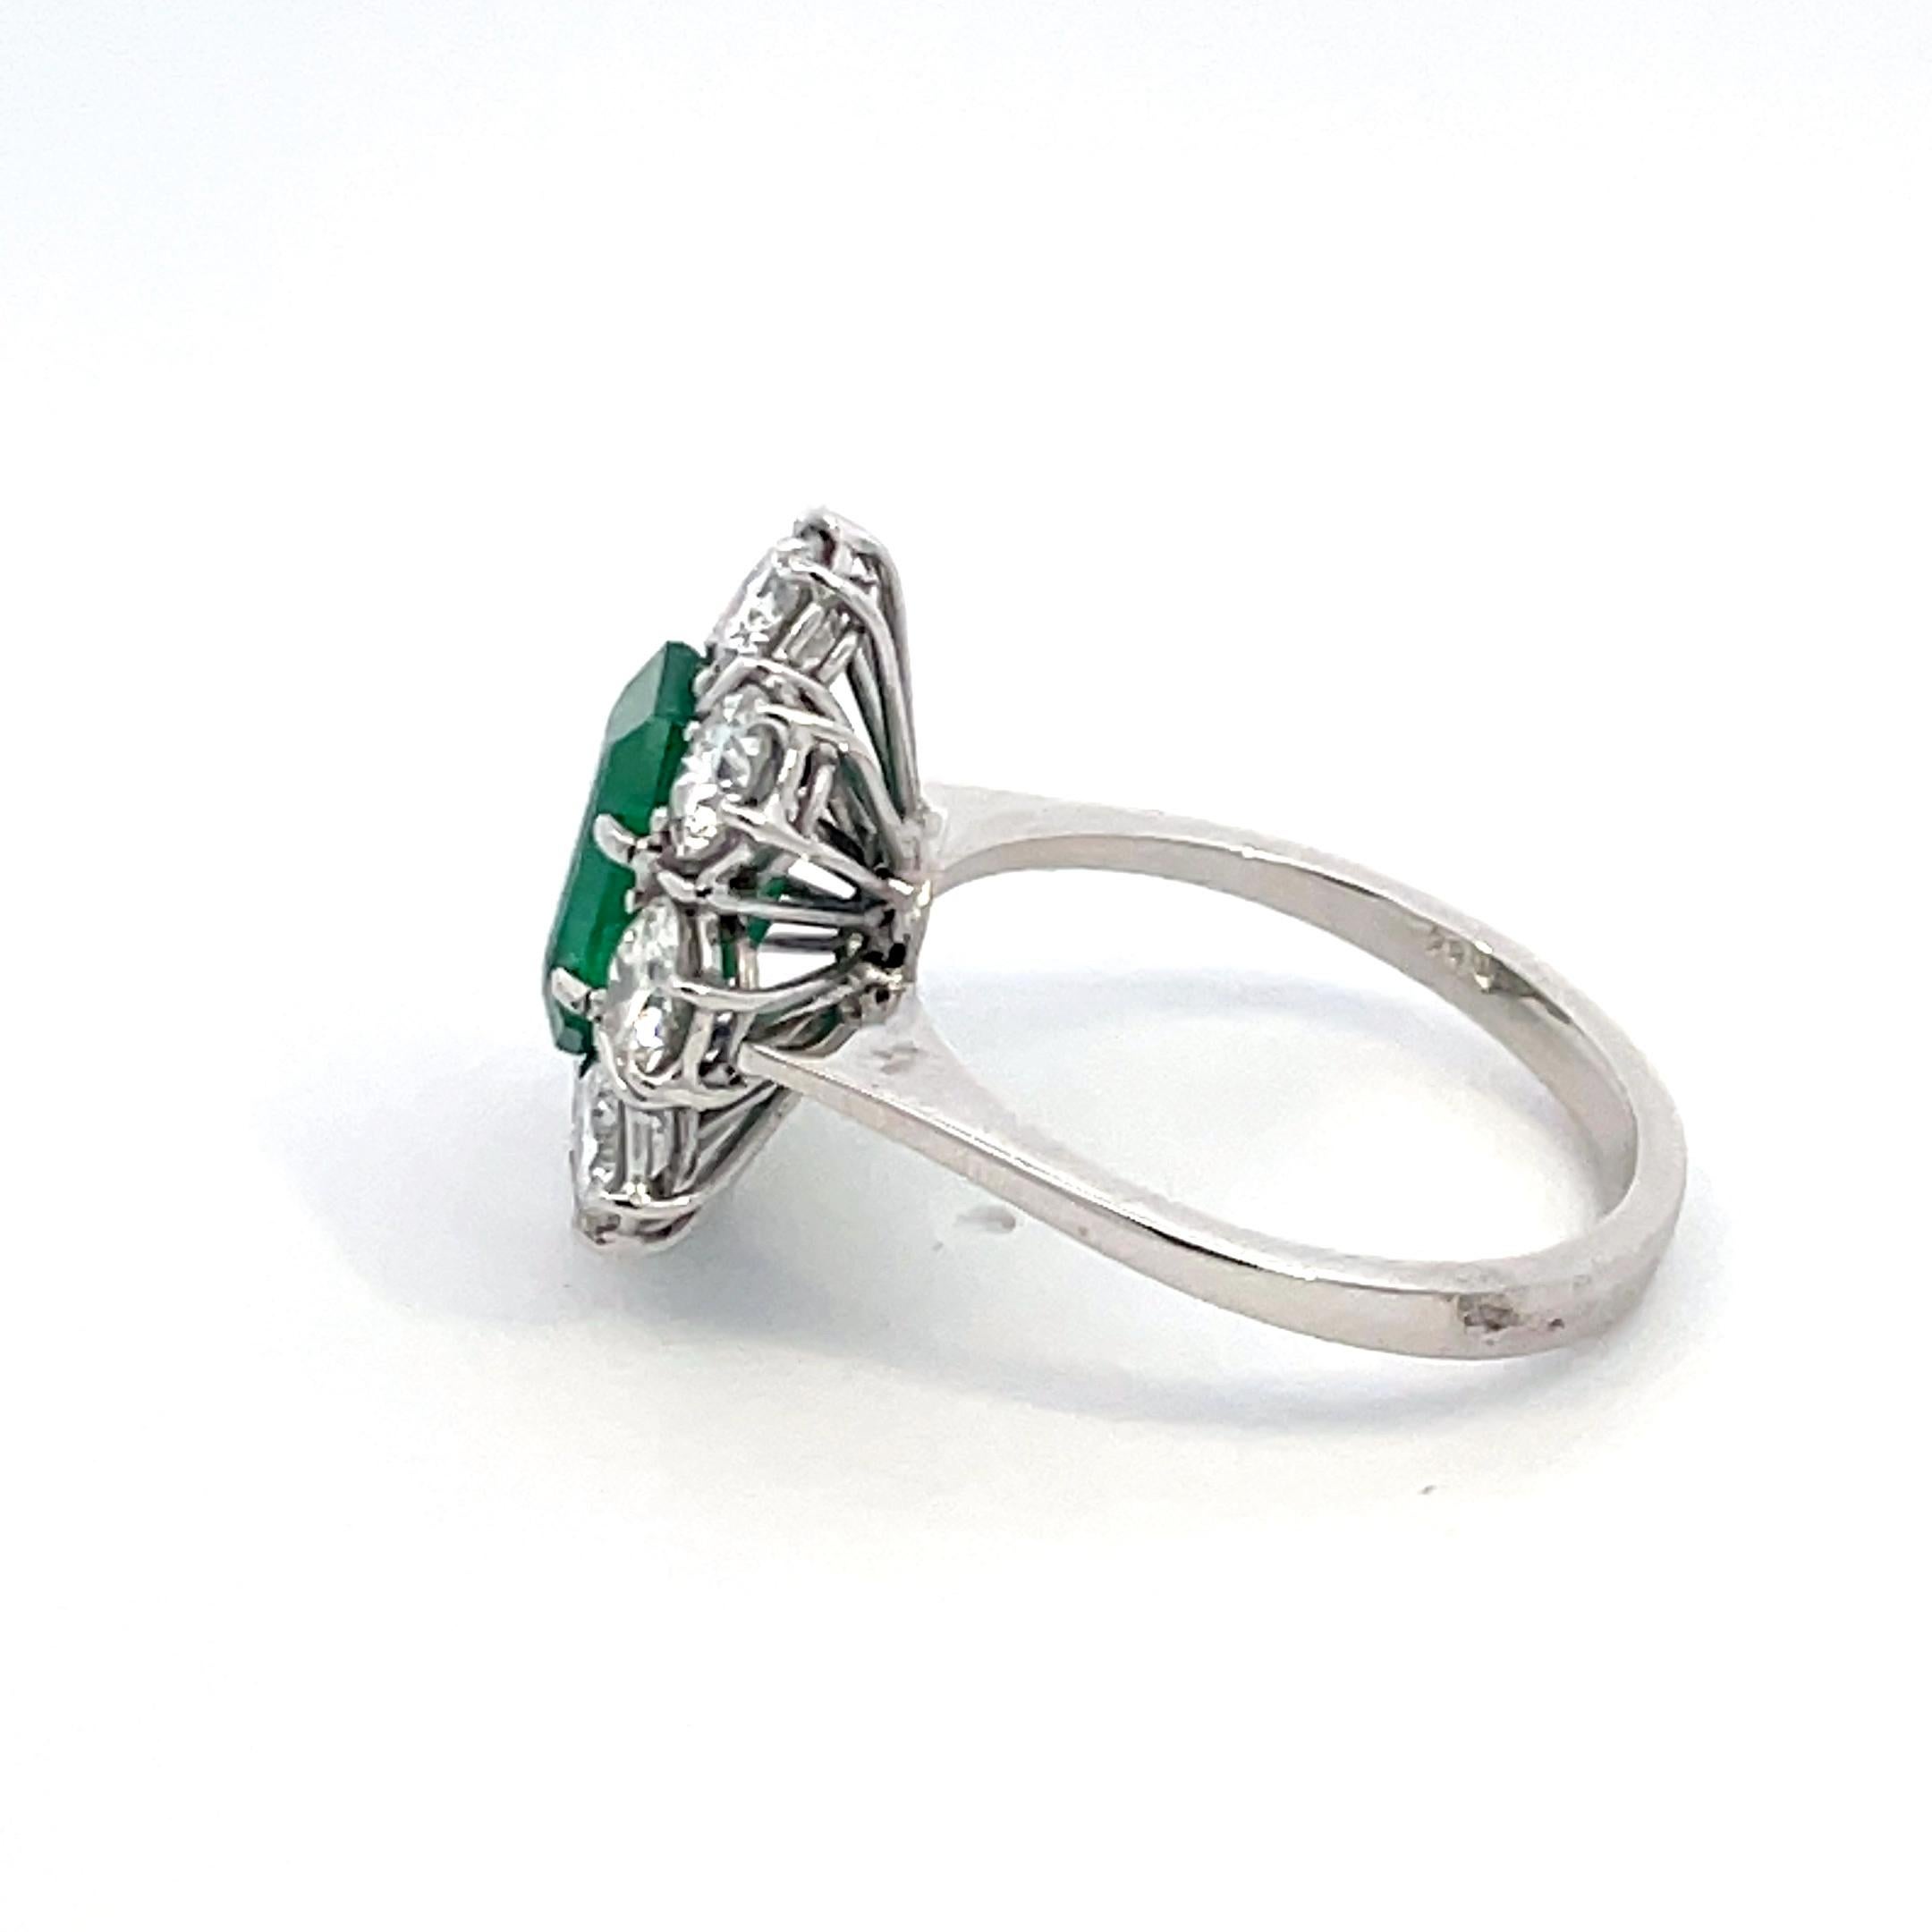 Charming emerald and diamond ring, approx 3 cts emerald colombia origin and 8 stones of 0,30cts round diamonds round for a 2,40 cts total approx.